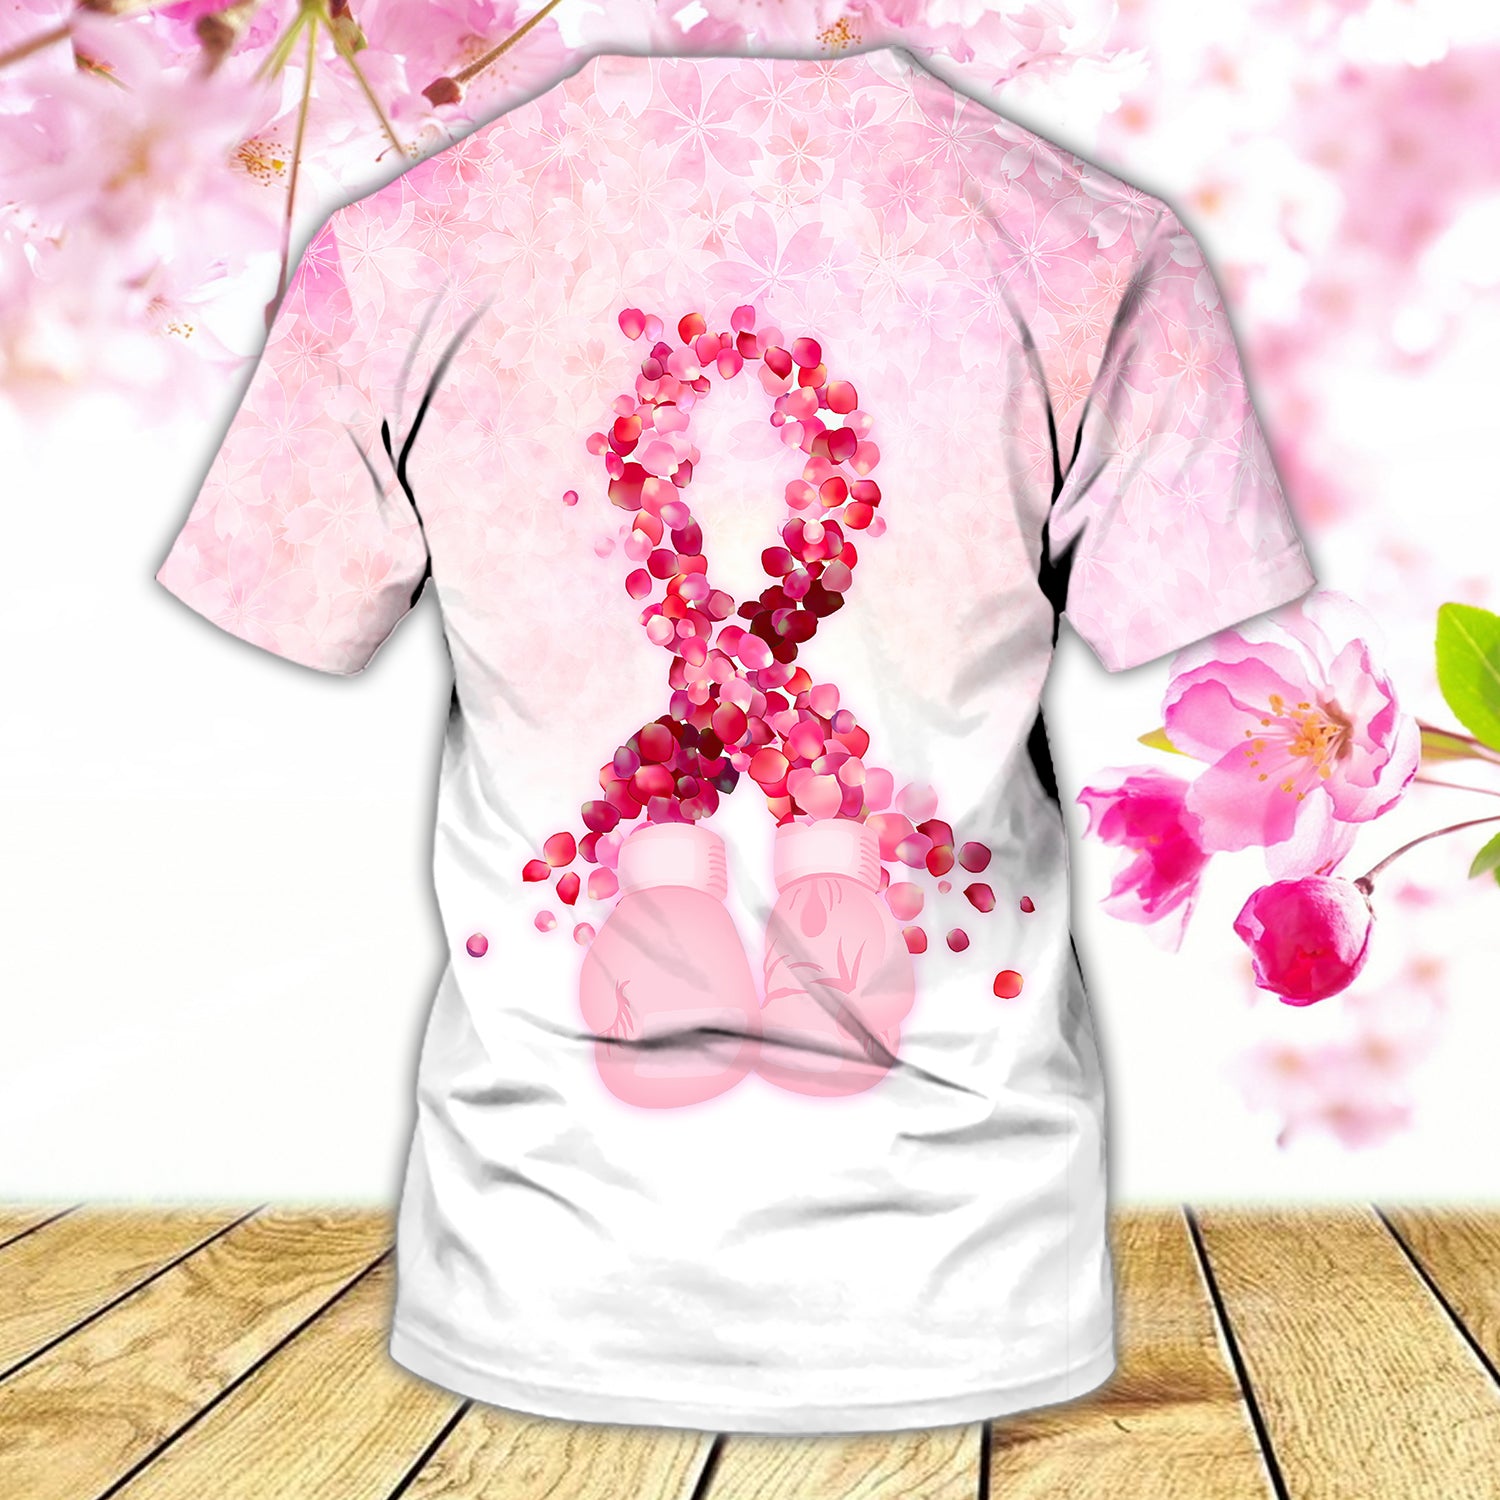 Novenber Girl fought Breast Cancer as a Warrior - Personalized Name 3D Tshirt - Nmd 20